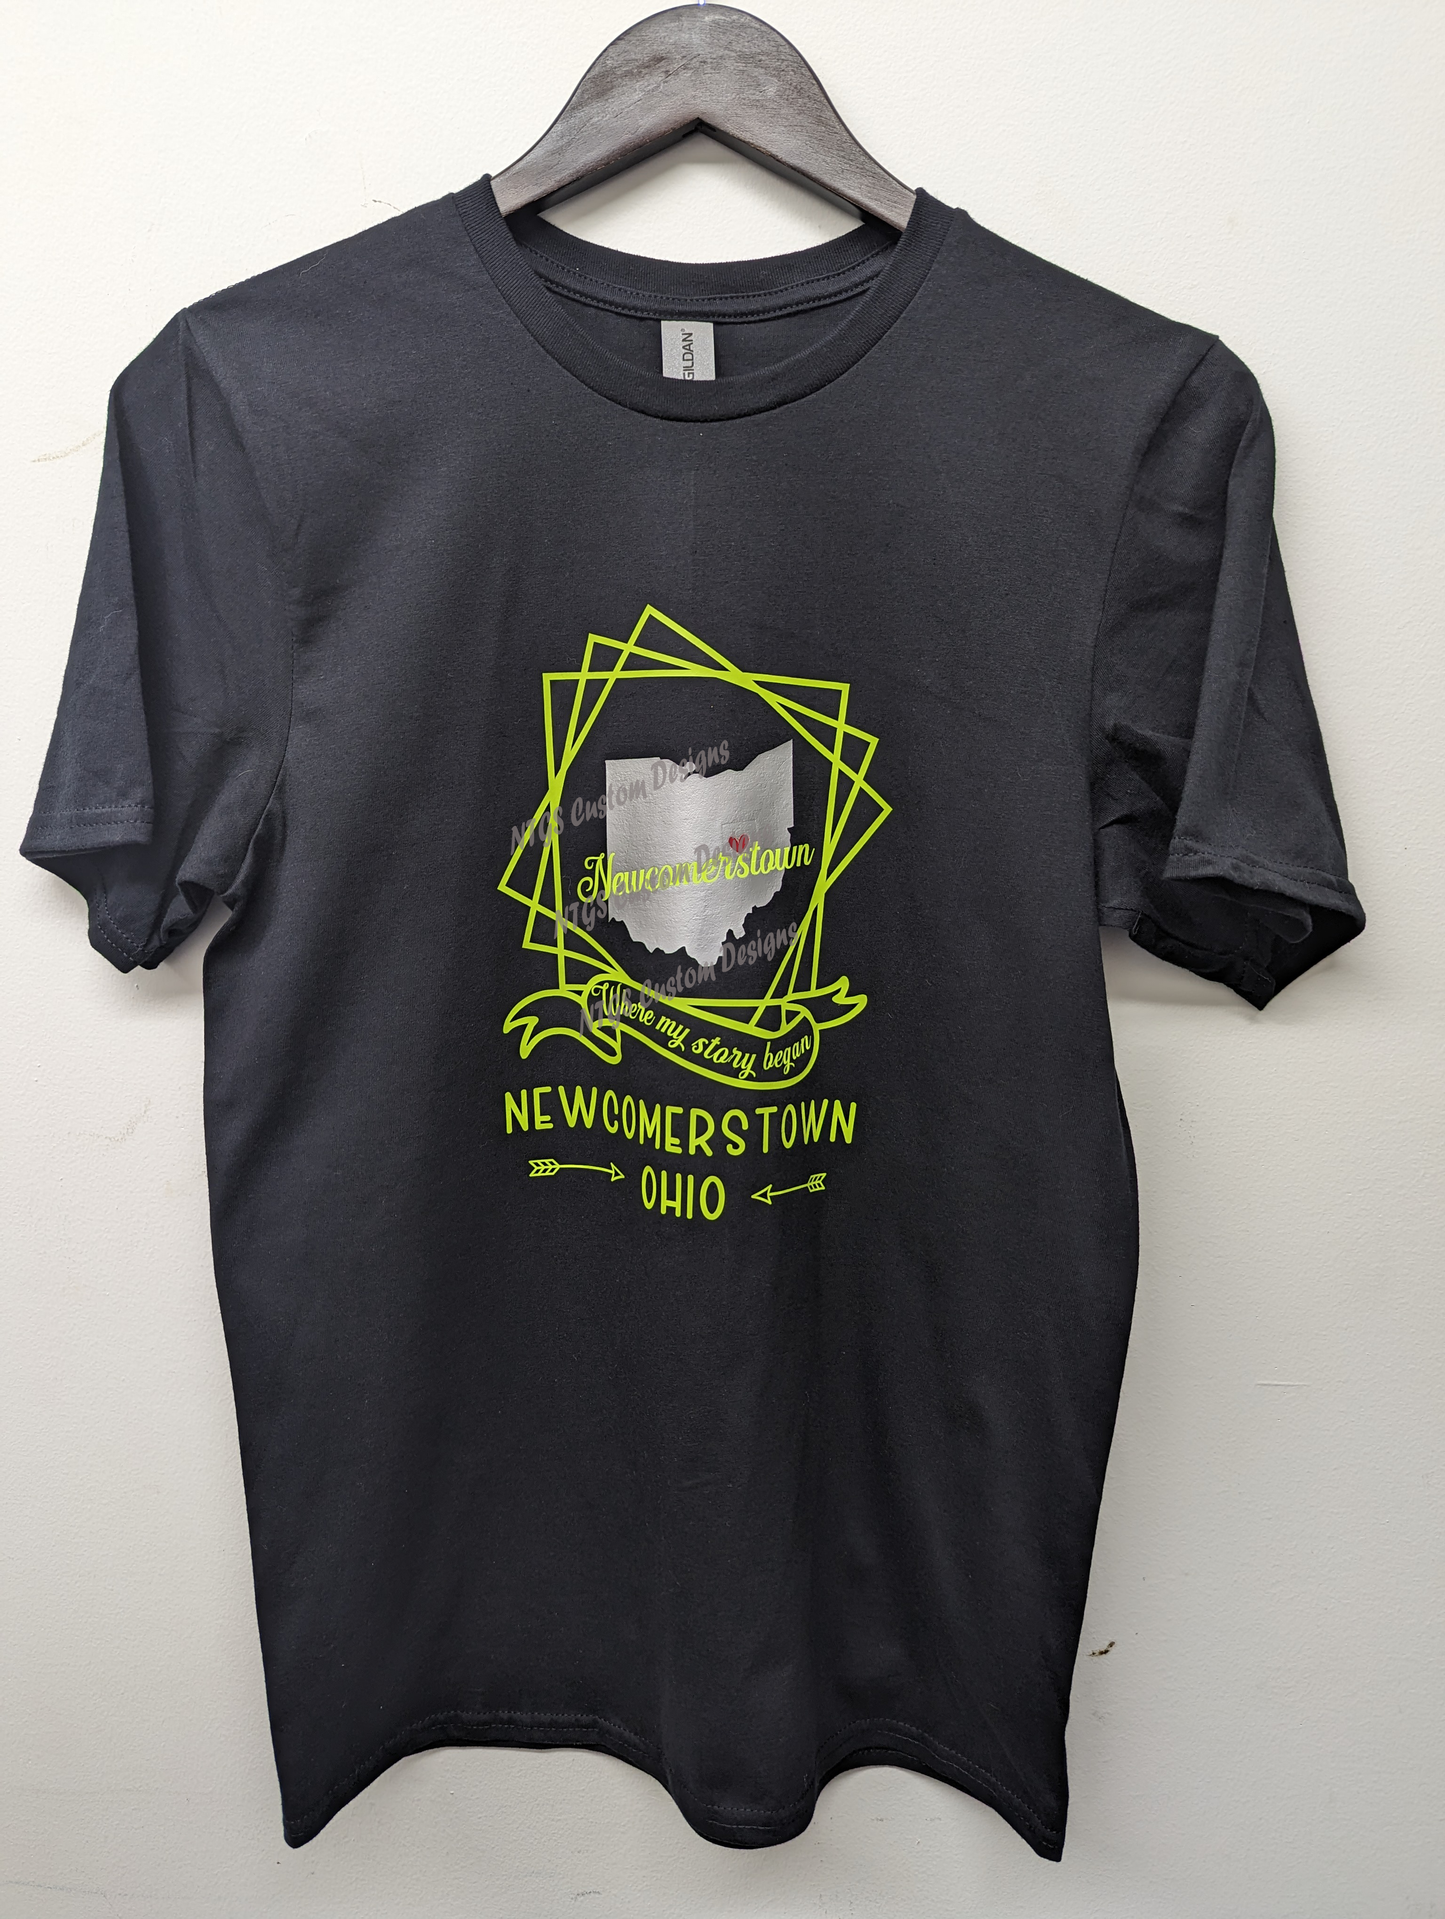 Newcomerstown-Where my story began-Blacktee with square design